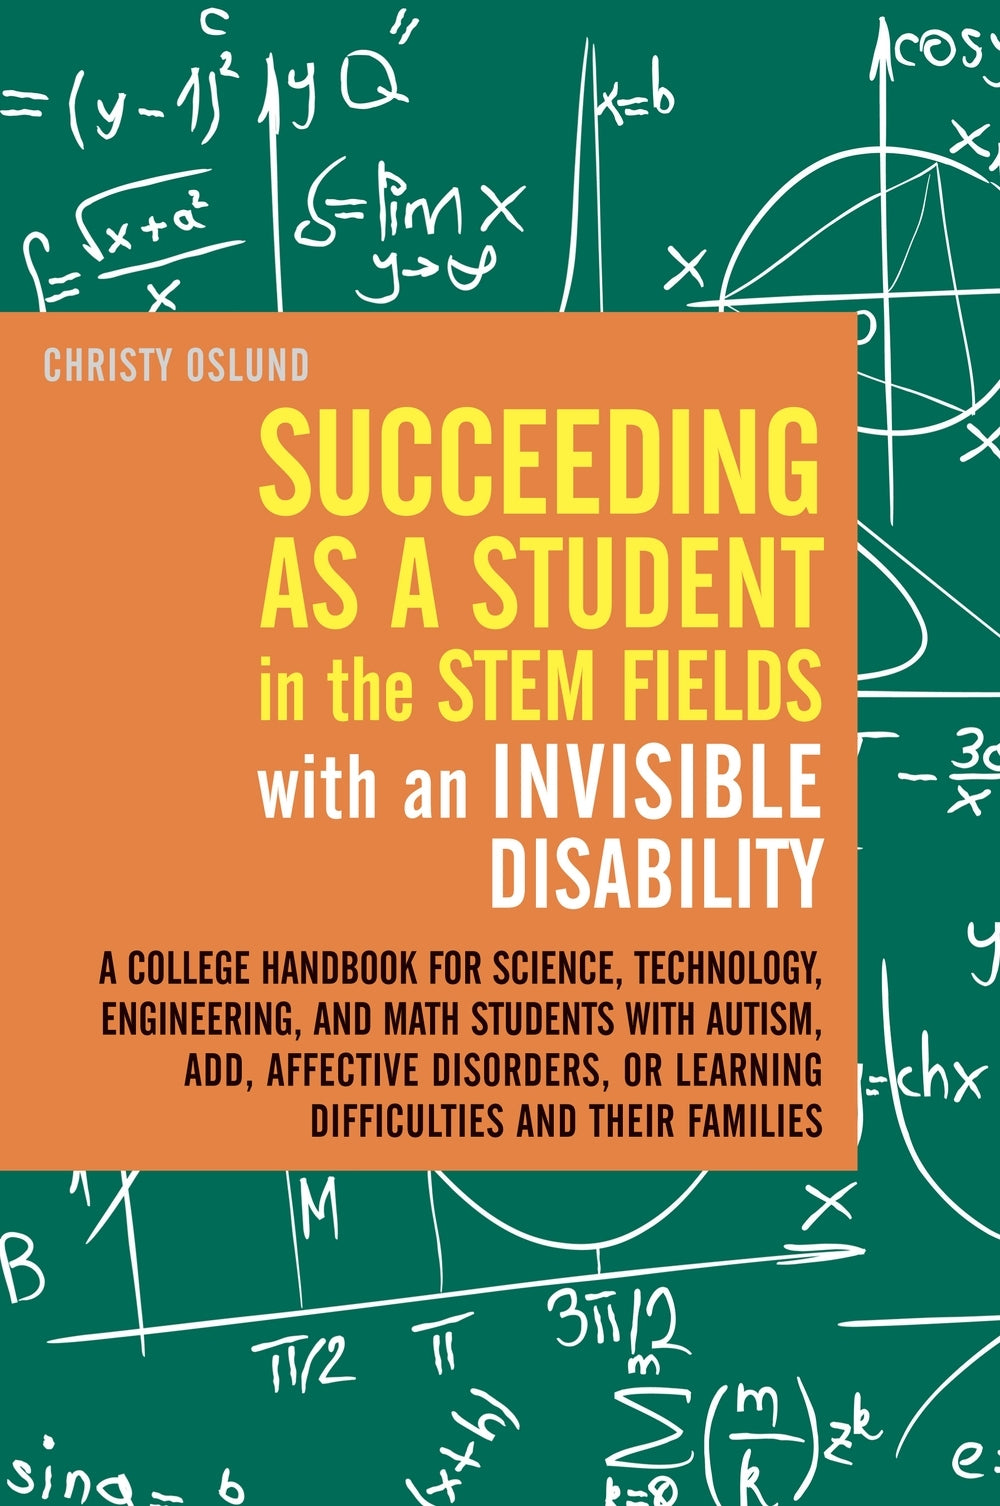 Succeeding as a Student in the STEM Fields with an Invisible Disability by Christy Oslund